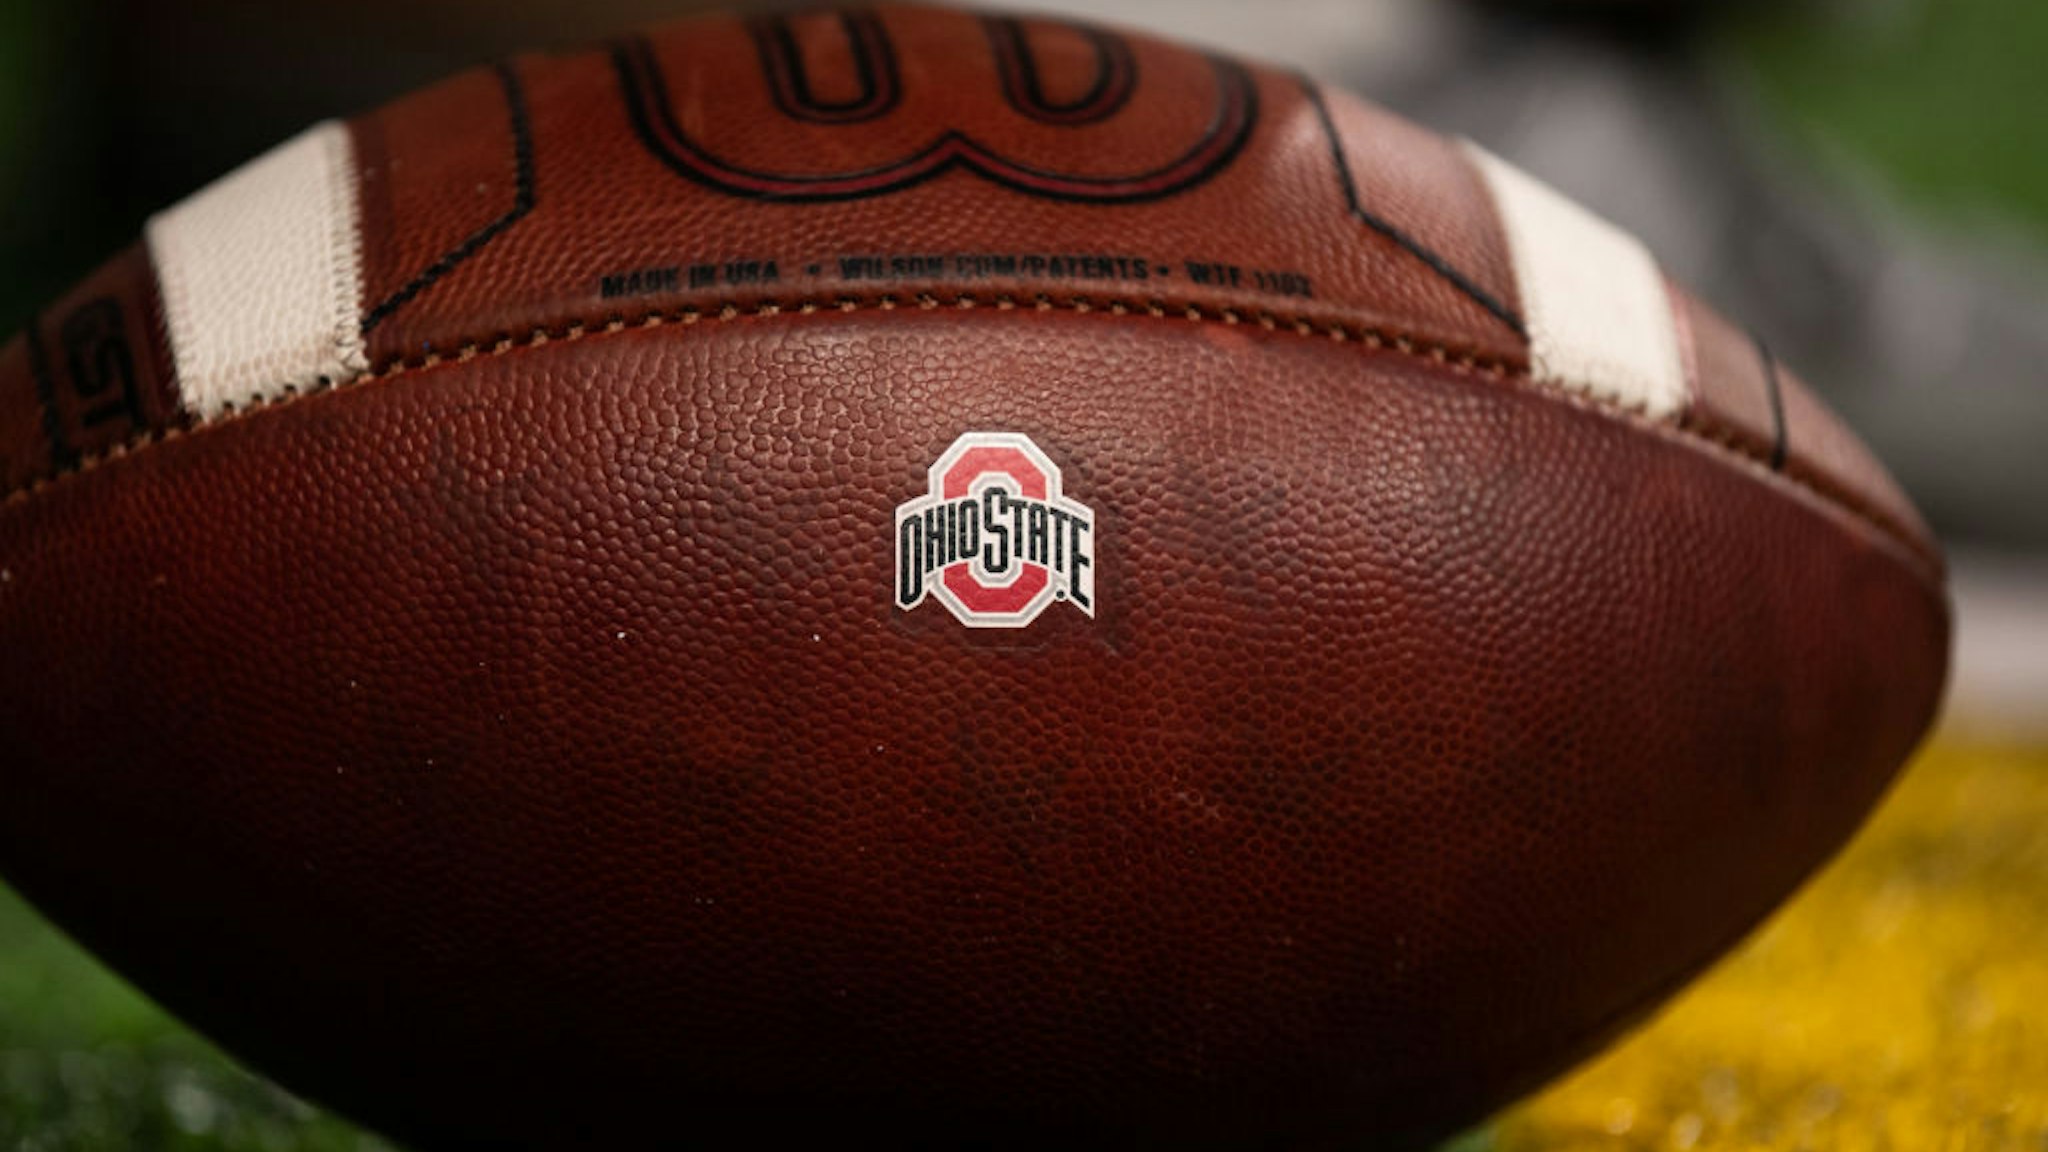 INDIANAPOLIS, IN - DECEMBER 07: A NCAA football with the Ohio State Buckeyes logo on it during the Big 10 Championship game between the Wisconsin Badgers and Ohio State Buckeyes on December 7, 2019, at Lucas Oil Stadium in Indianapolis, IN. (Photo by Zach Bolinger/Icon Sportswire via Getty Images)